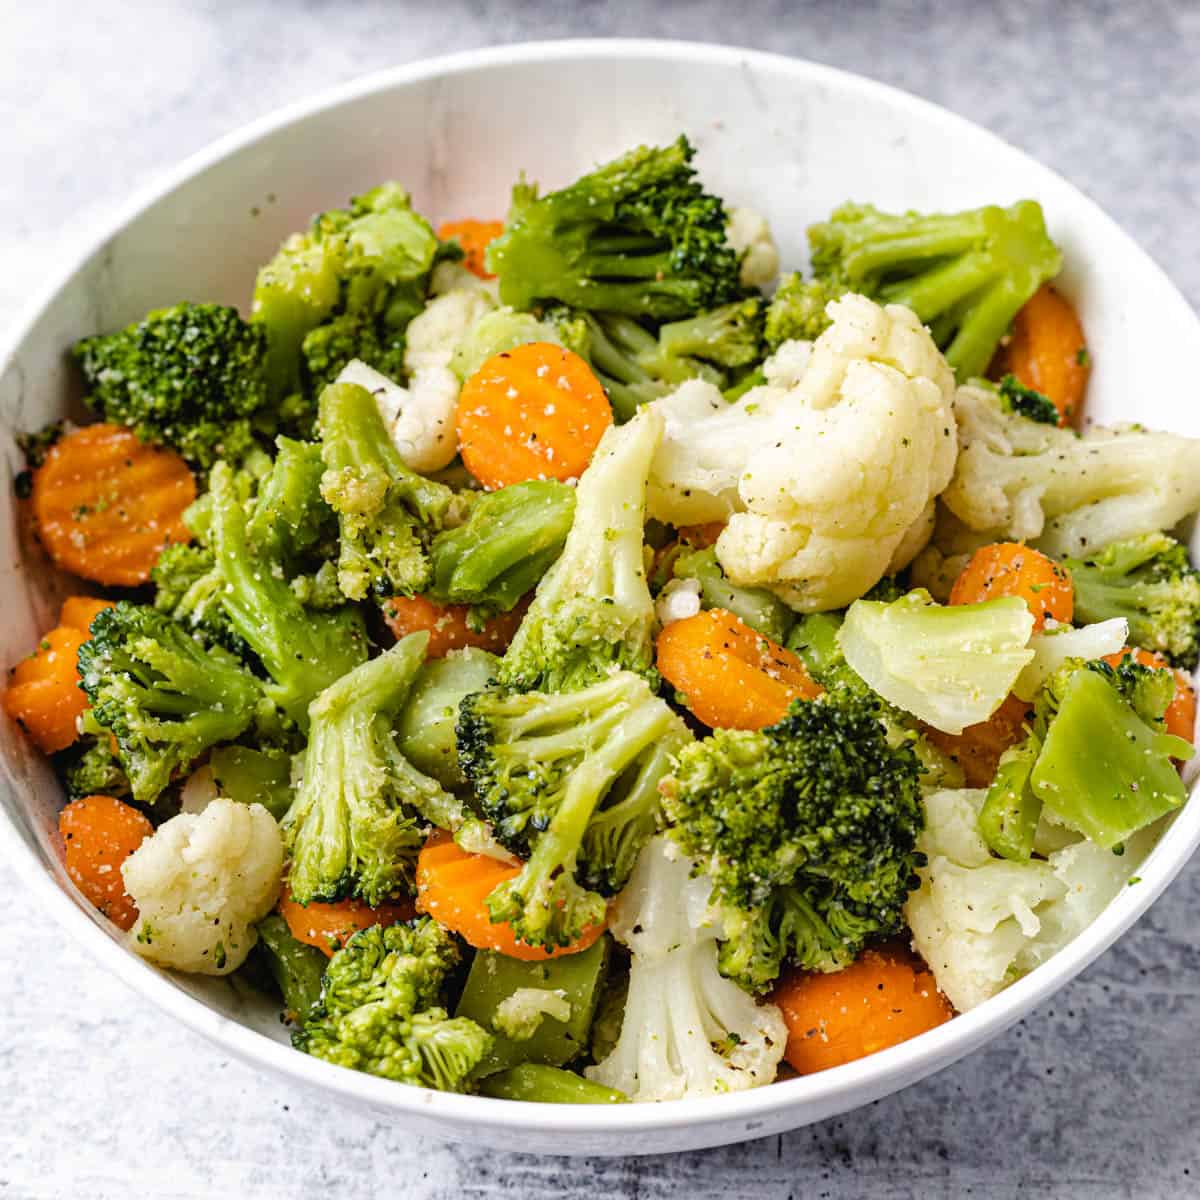 How To Steam Vegetables In An Air Fryer 